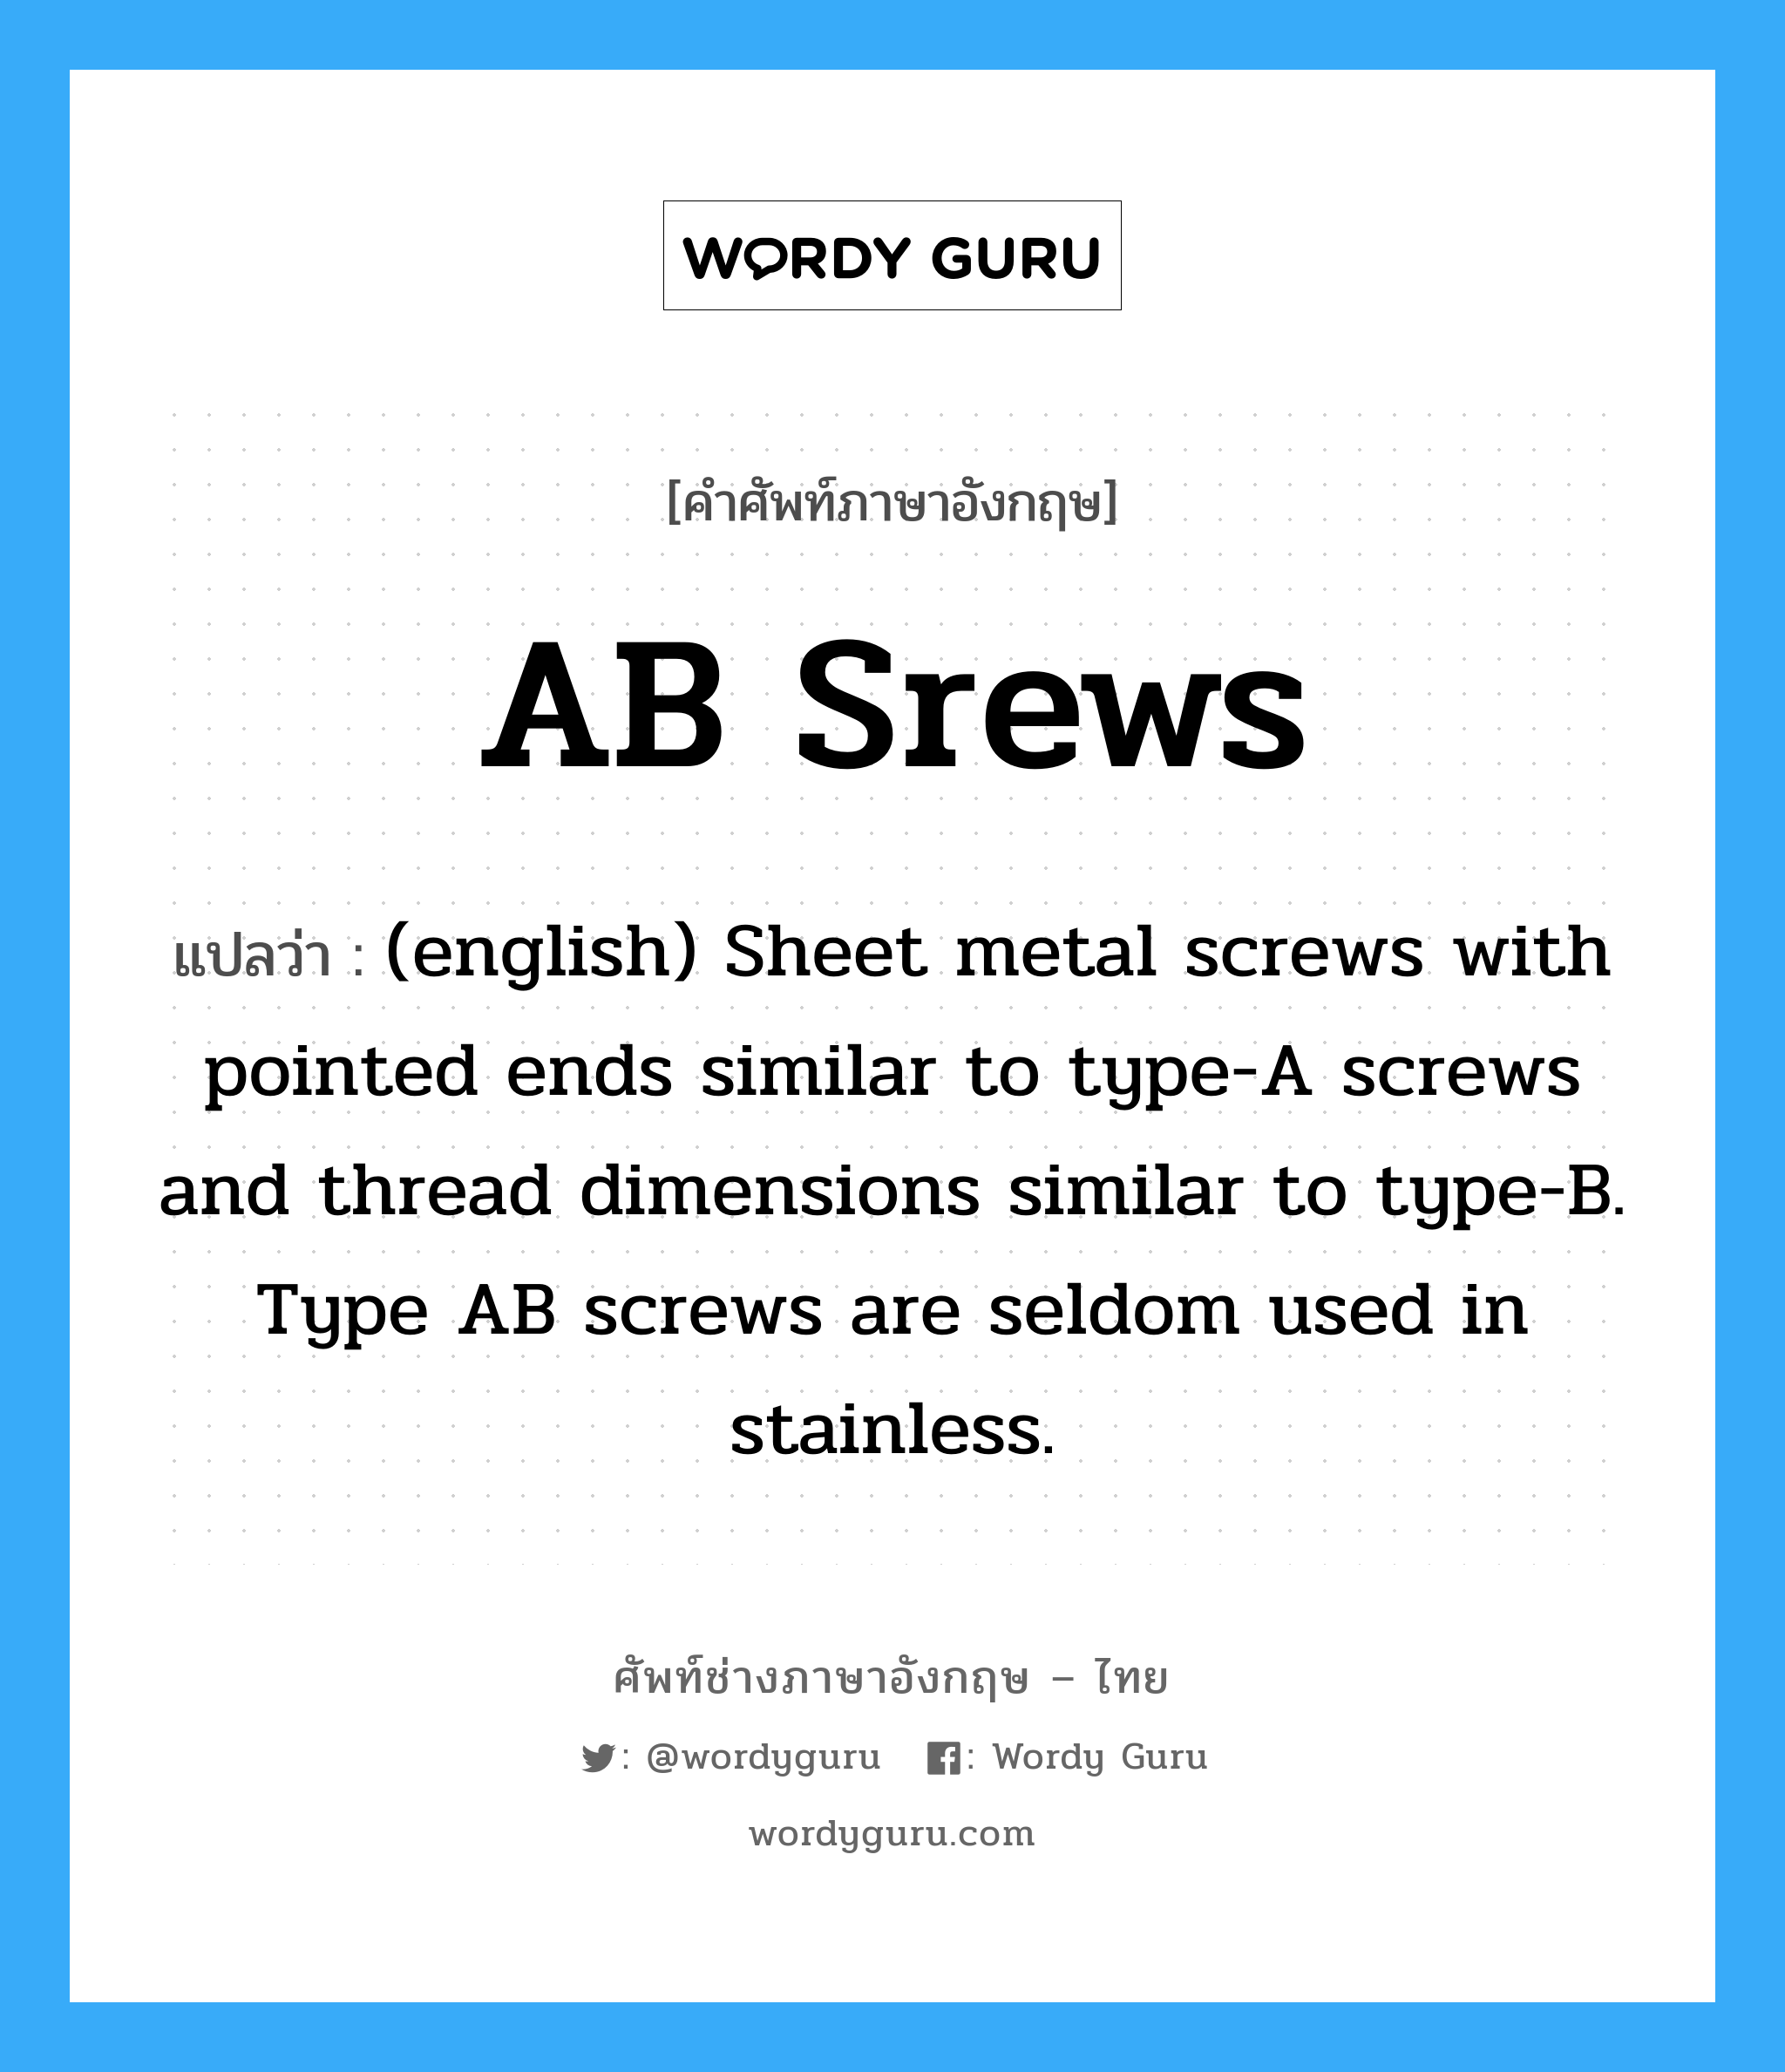 (english) Sheet metal screws with pointed ends similar to type-A screws and thread dimensions similar to type-B. Type AB screws are seldom used in stainless. ภาษาอังกฤษ?, คำศัพท์ช่างภาษาอังกฤษ - ไทย (english) Sheet metal screws with pointed ends similar to type-A screws and thread dimensions similar to type-B. Type AB screws are seldom used in stainless. คำศัพท์ภาษาอังกฤษ (english) Sheet metal screws with pointed ends similar to type-A screws and thread dimensions similar to type-B. Type AB screws are seldom used in stainless. แปลว่า AB Srews